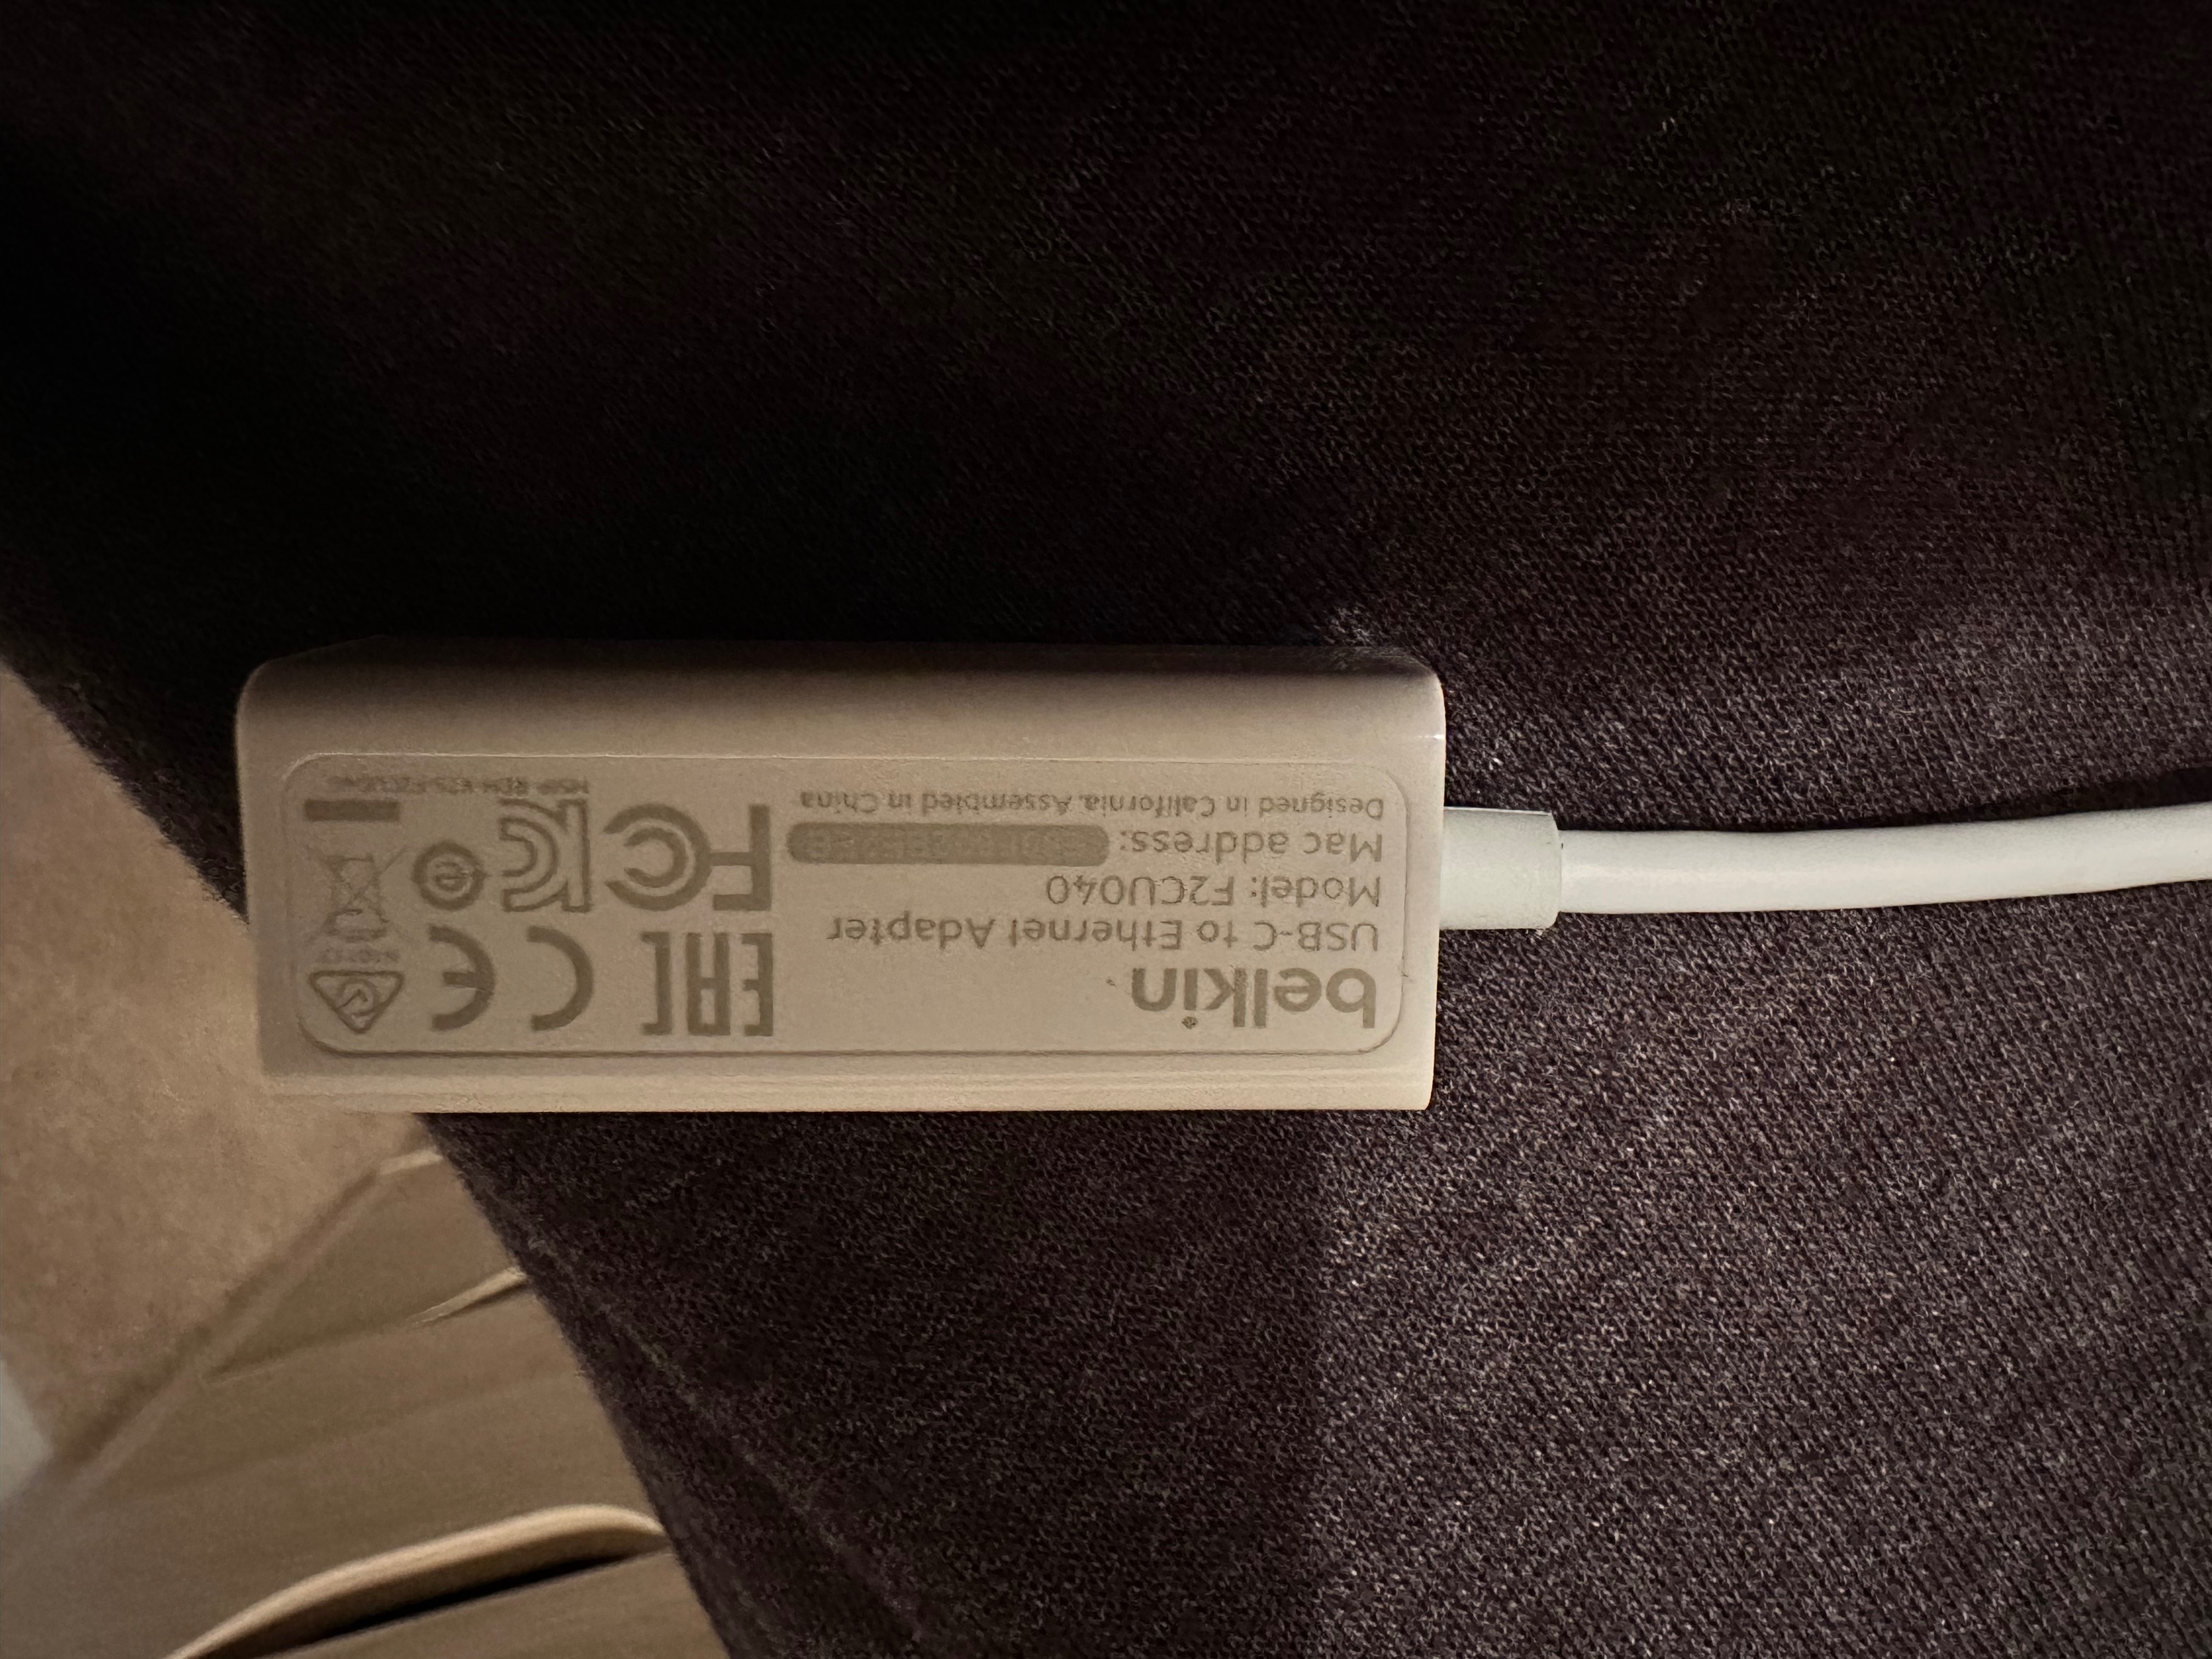 What to do when the USB-C ethernet adapter for your Mac doesn't